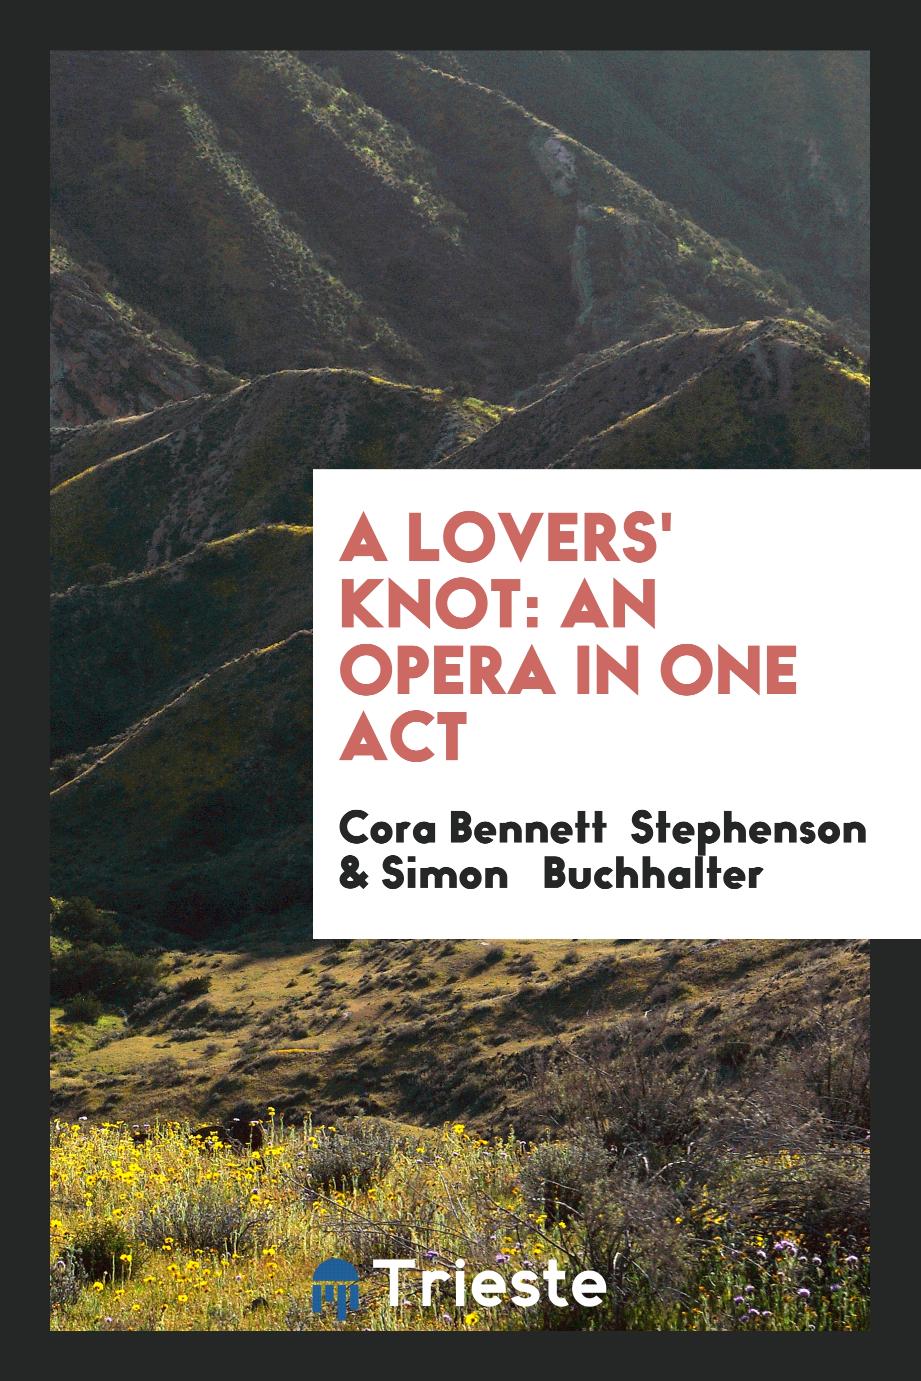 A Lovers' Knot: An Opera in One Act